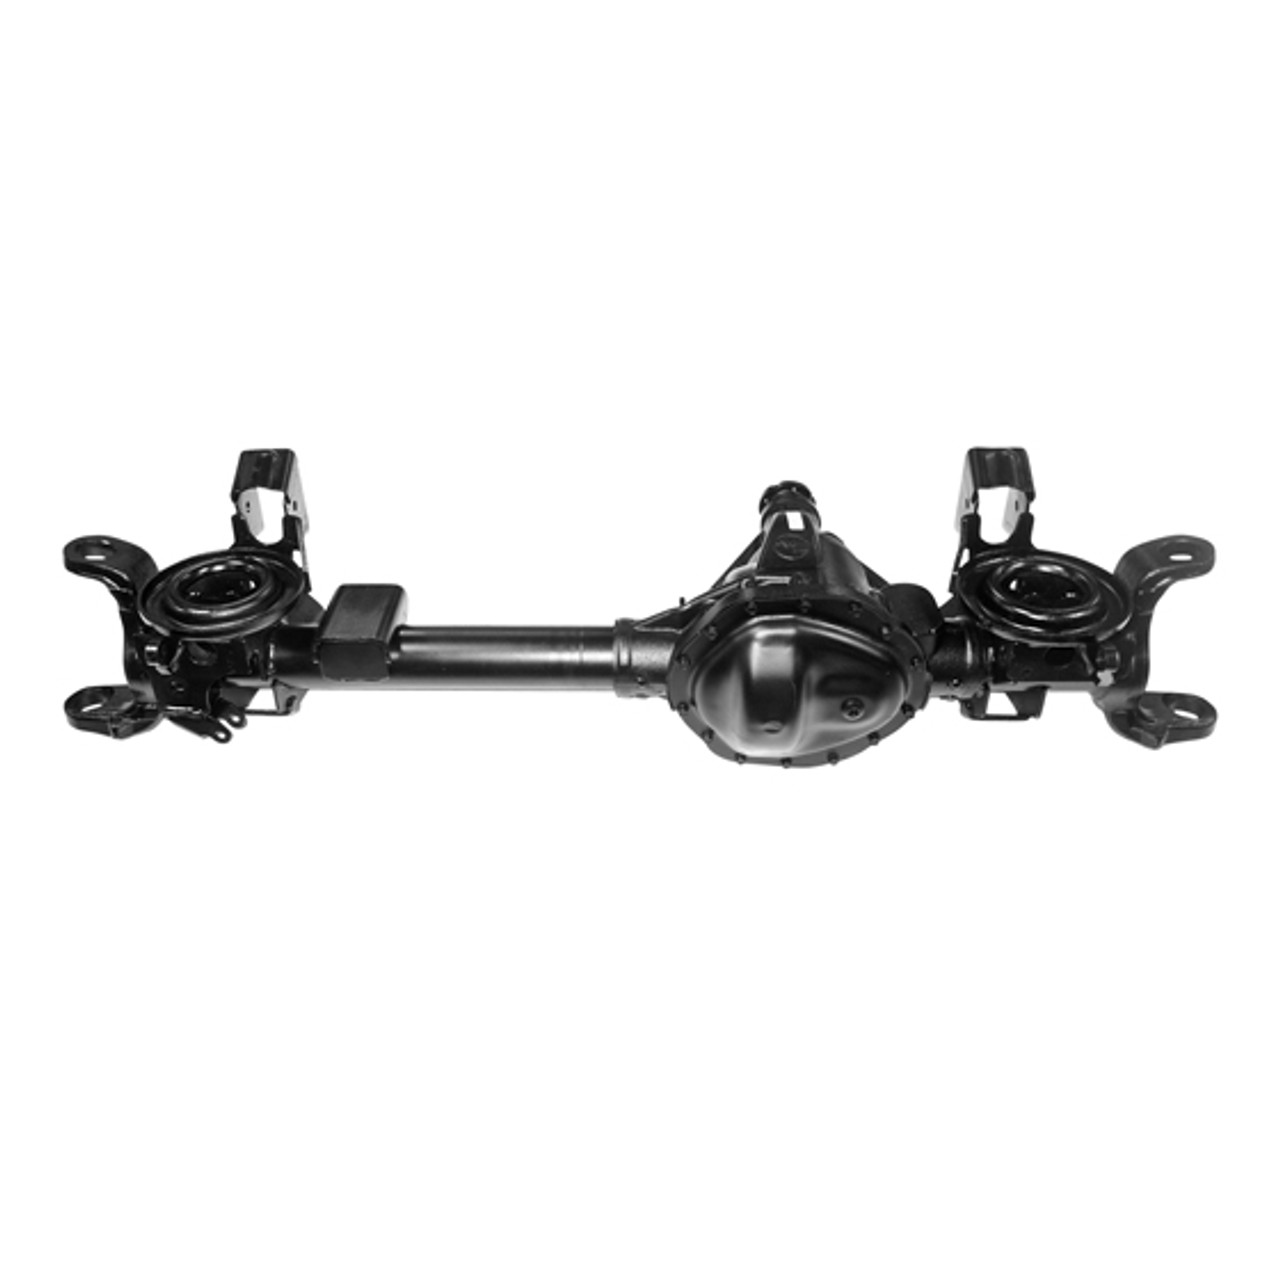 Zumbrota Remanufactured Front Axle Assembly 9.25" 2013 Dodge Ram 2500 & 3500 3.42 Ratio,